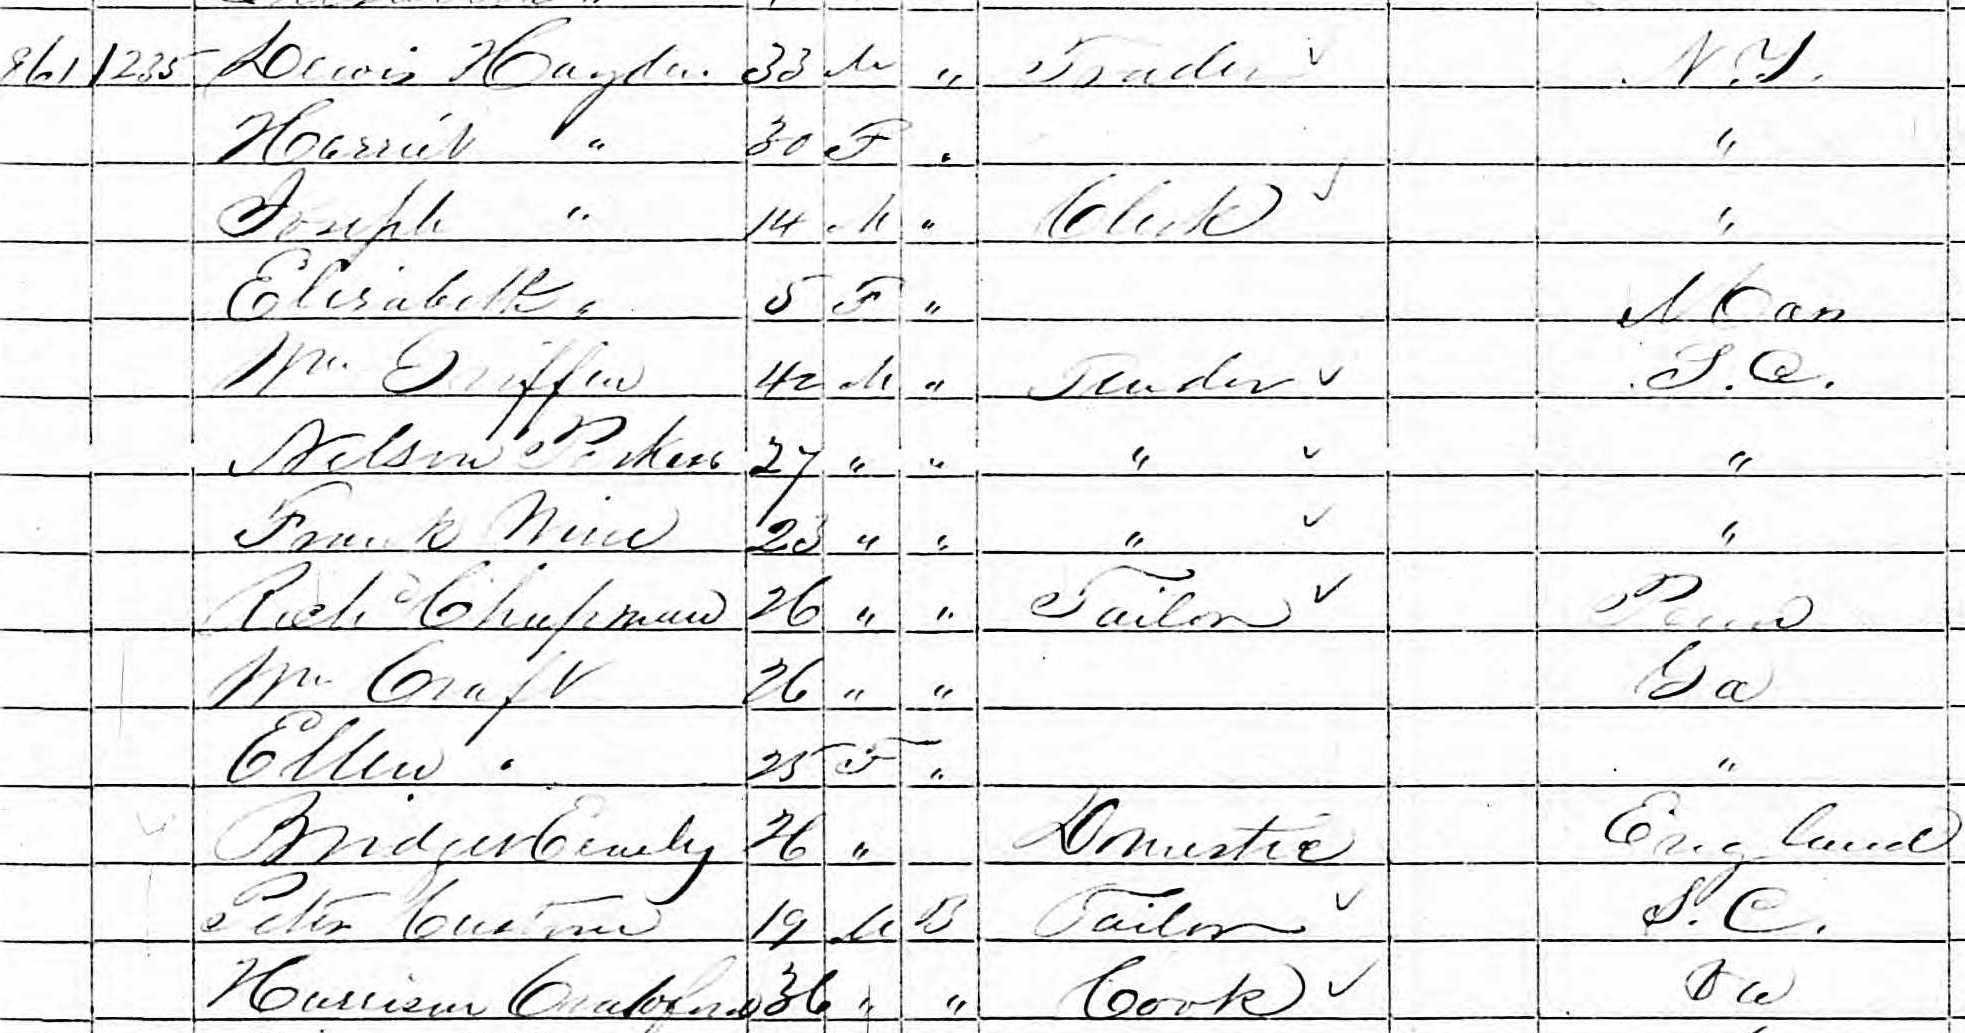 1850 Boston Census Record that describes Mr. and Ellen Craft as lodgers in the Hayden home on Beacon Hill.